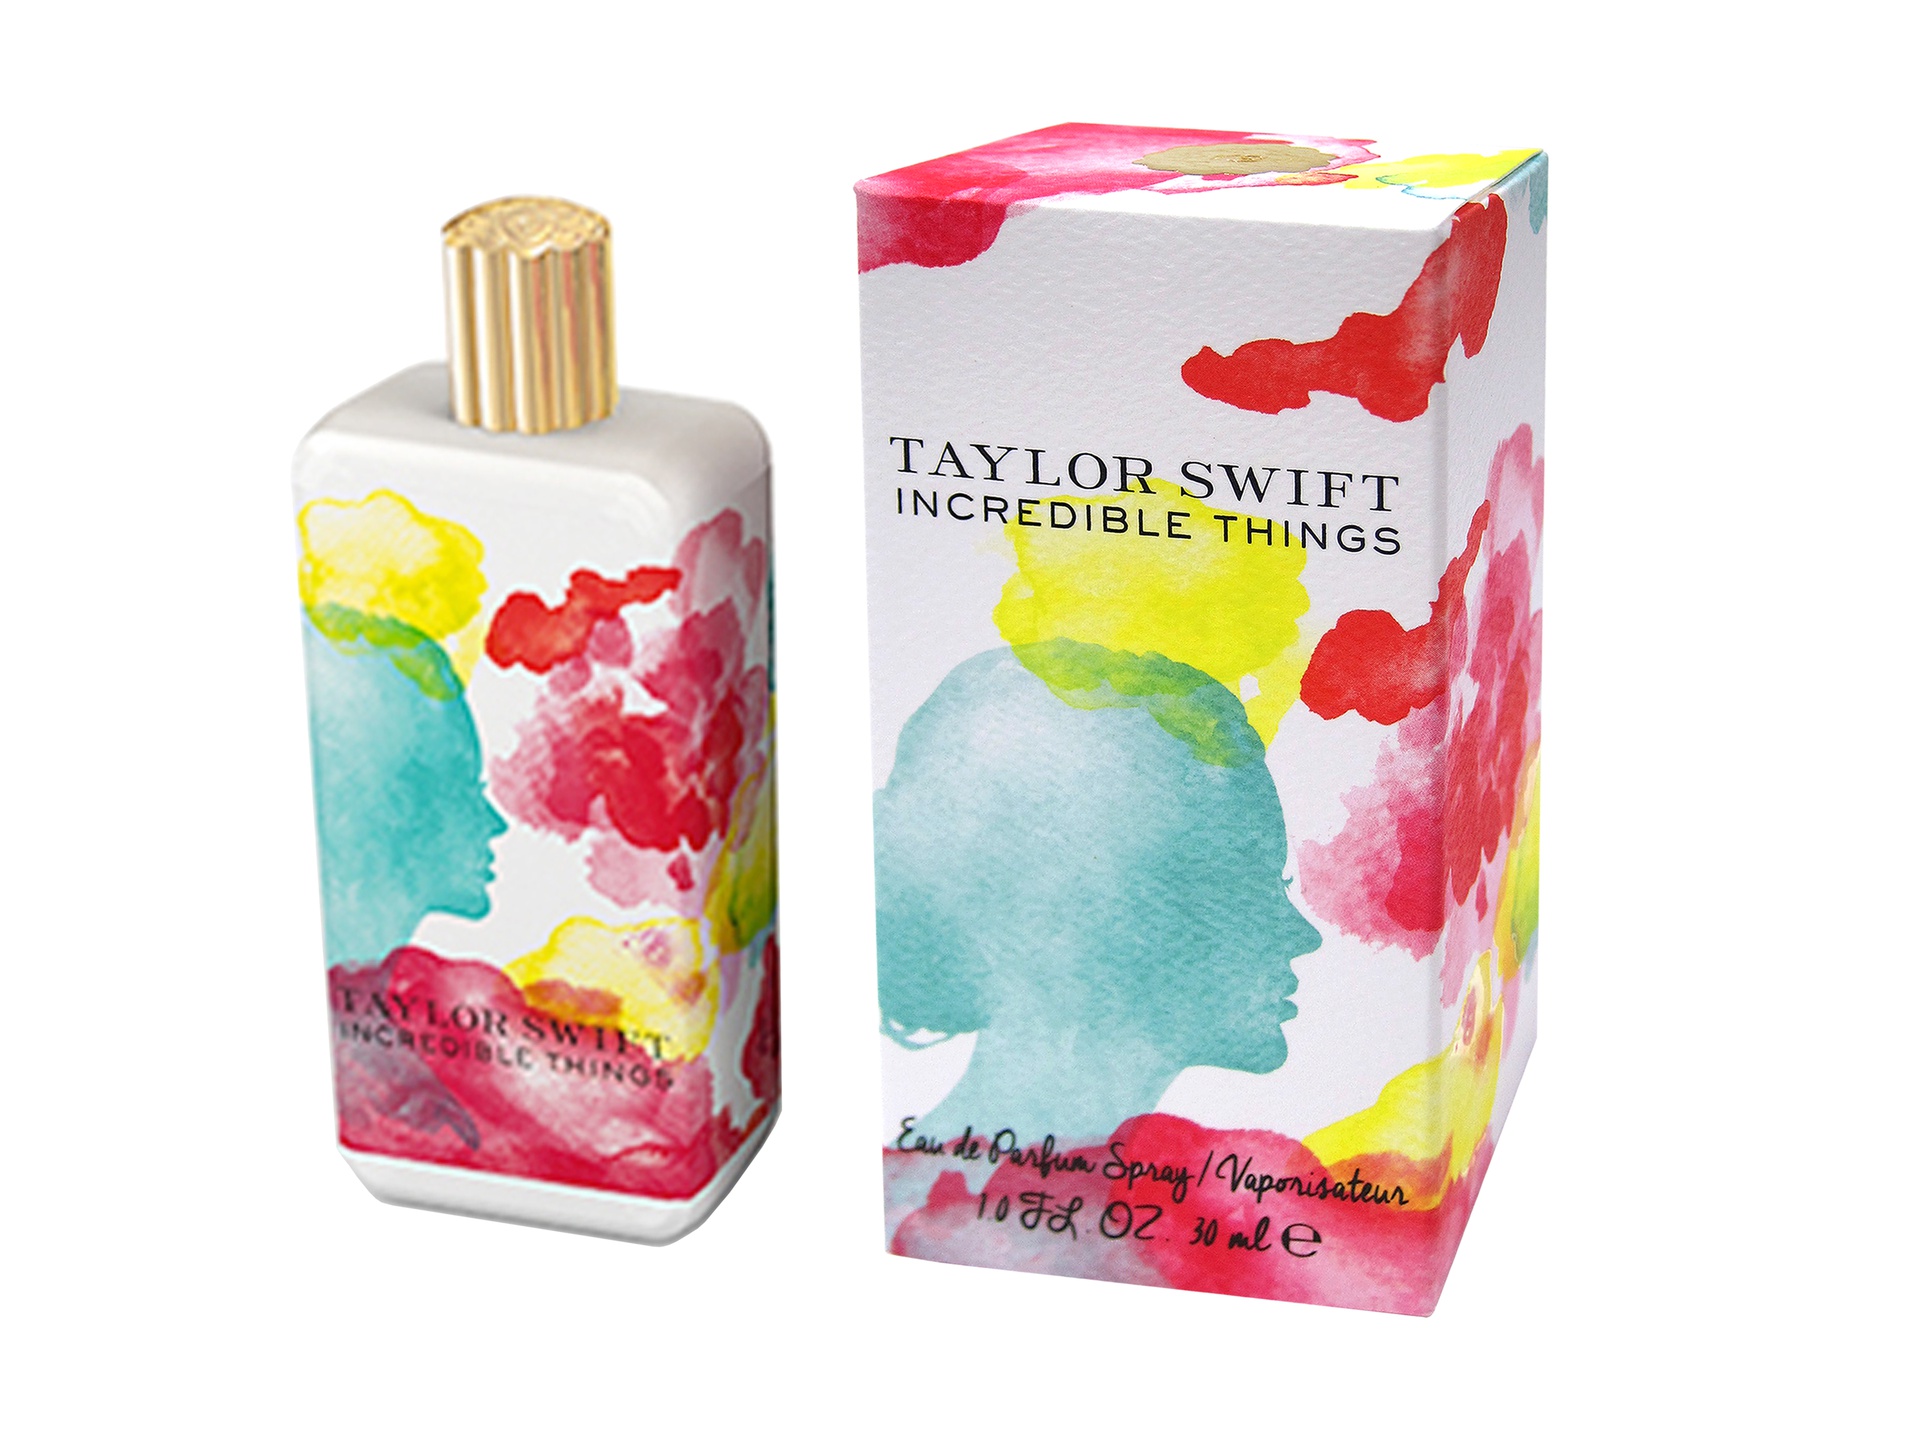 Taylor Swift Incredible Things bottle and carton